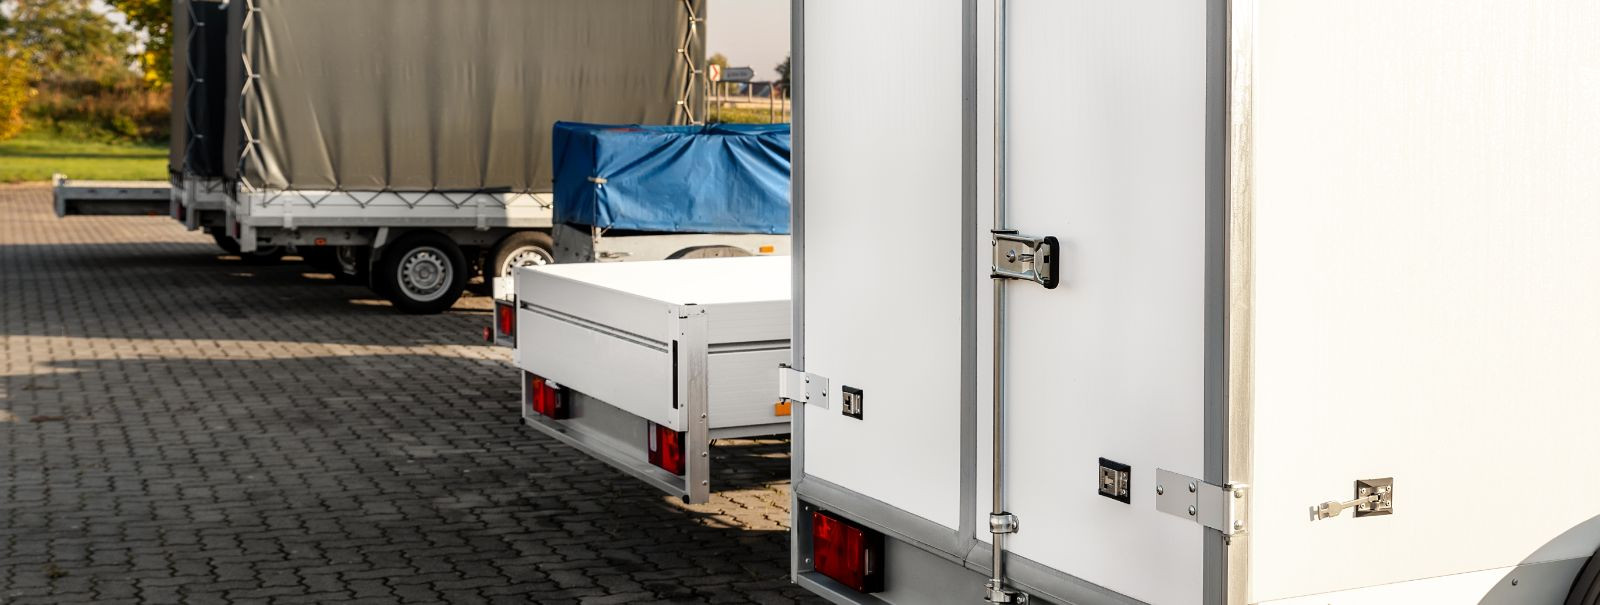 Welcome to the Smart Choice for Your Business: Trailer RentalAs a business owner, you're always looking for ways to streamline operations and cut costs without 